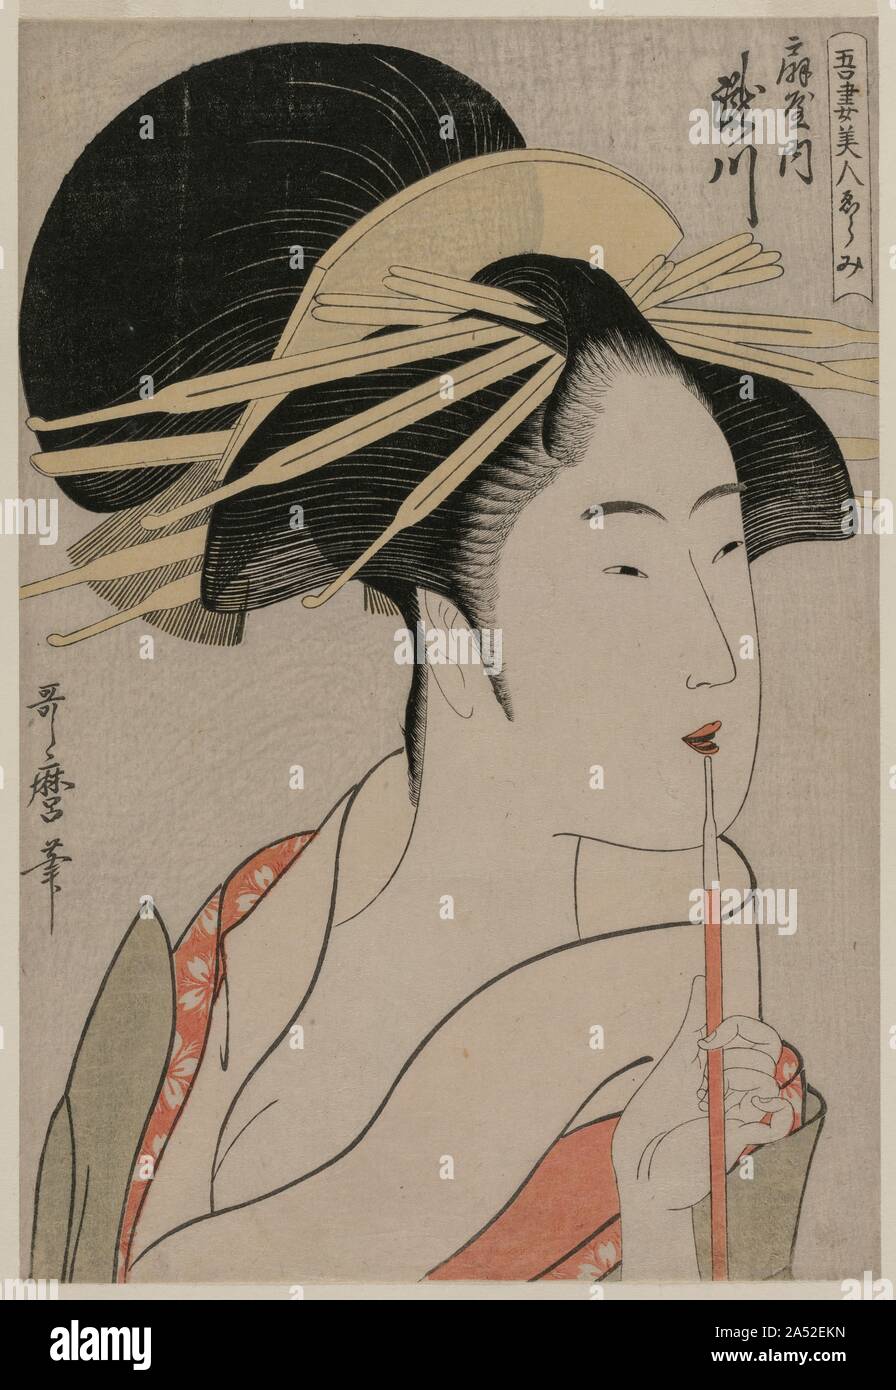 The Courtesan Takigawa of Ogiya (from the series A Selection of Beautiful Women of the East), c. 1798. The courtesan Takigawa worked for the Ogiya, &quot;House of Fans&quot; brothel, one of the most prestigious in the Yoshiwara. Here, she smokes tobacco, a fashionable trend in 18th-century Edo. Fashion-conscious women in Edo purchased prints of the most famous beauties just as contemporary women buy fashion magazines to learn about the latest styles in make-up and hair. The strands of hair at her temple were printed from thin pieces of wood left in relief when the areas on either side of them Stock Photo